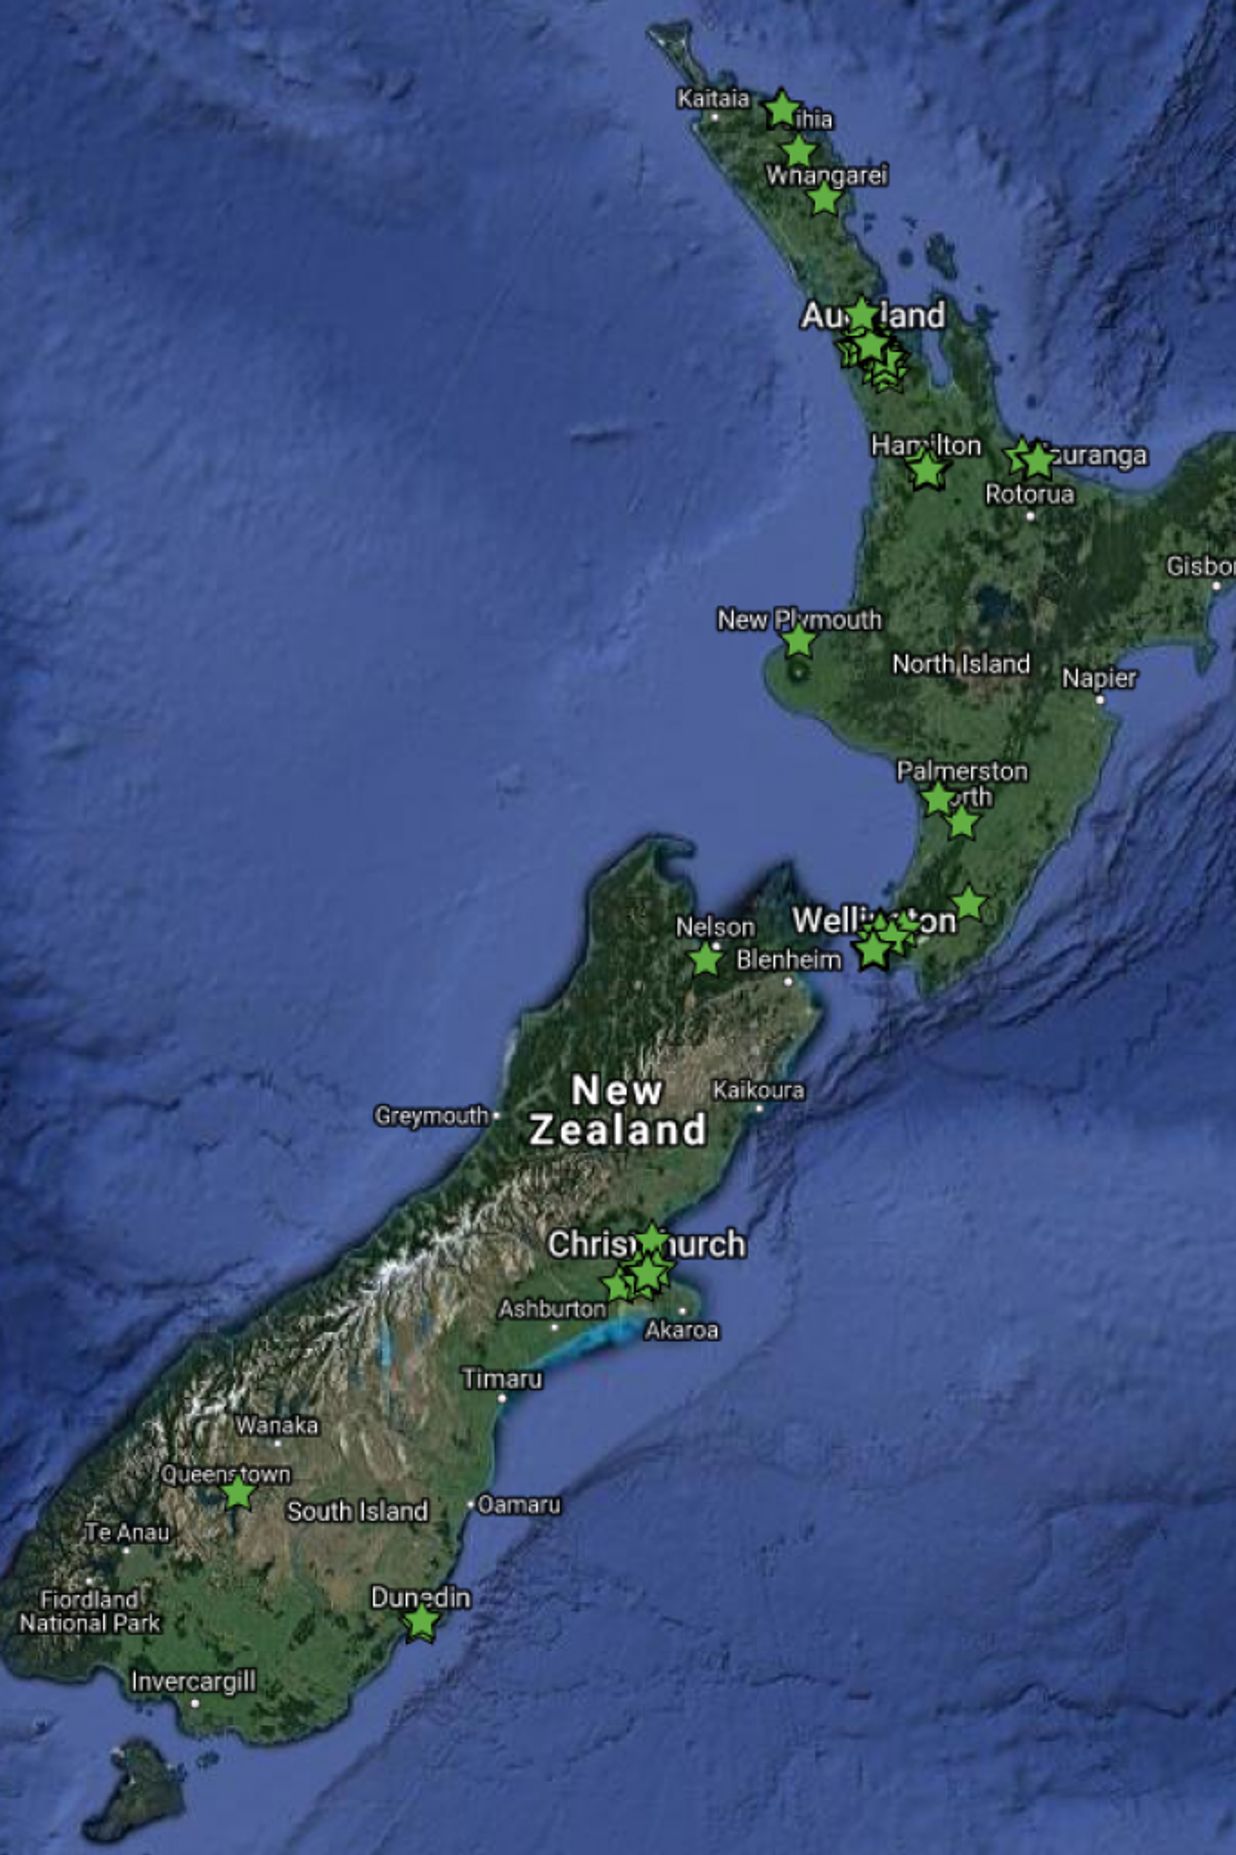 NZ and The NZGBC